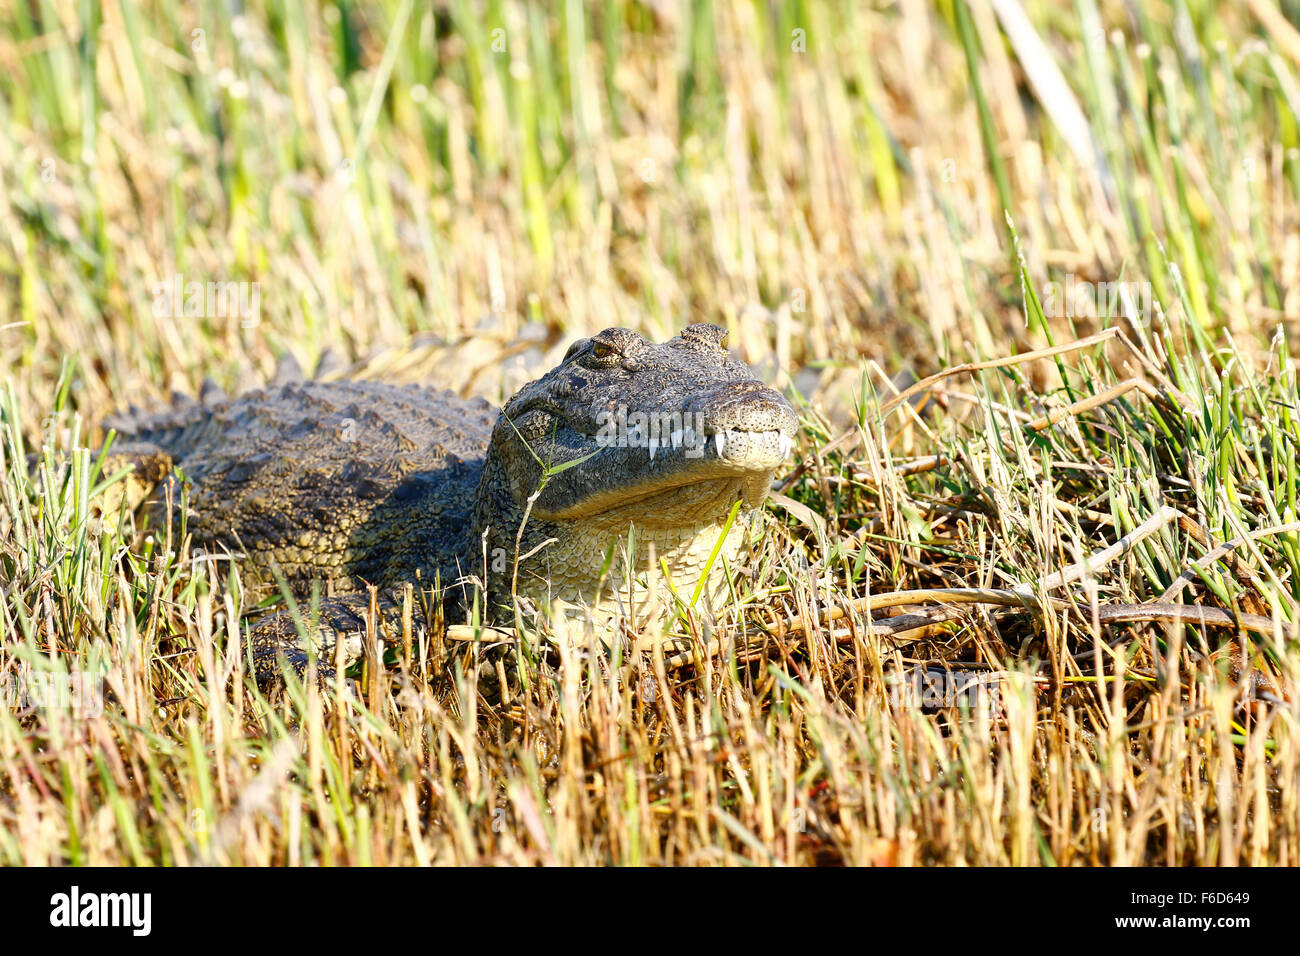 A large and aggressive species with a broad snout, especially in older animals. It has a dark bronze coloration Nile Crocodile Stock Photo